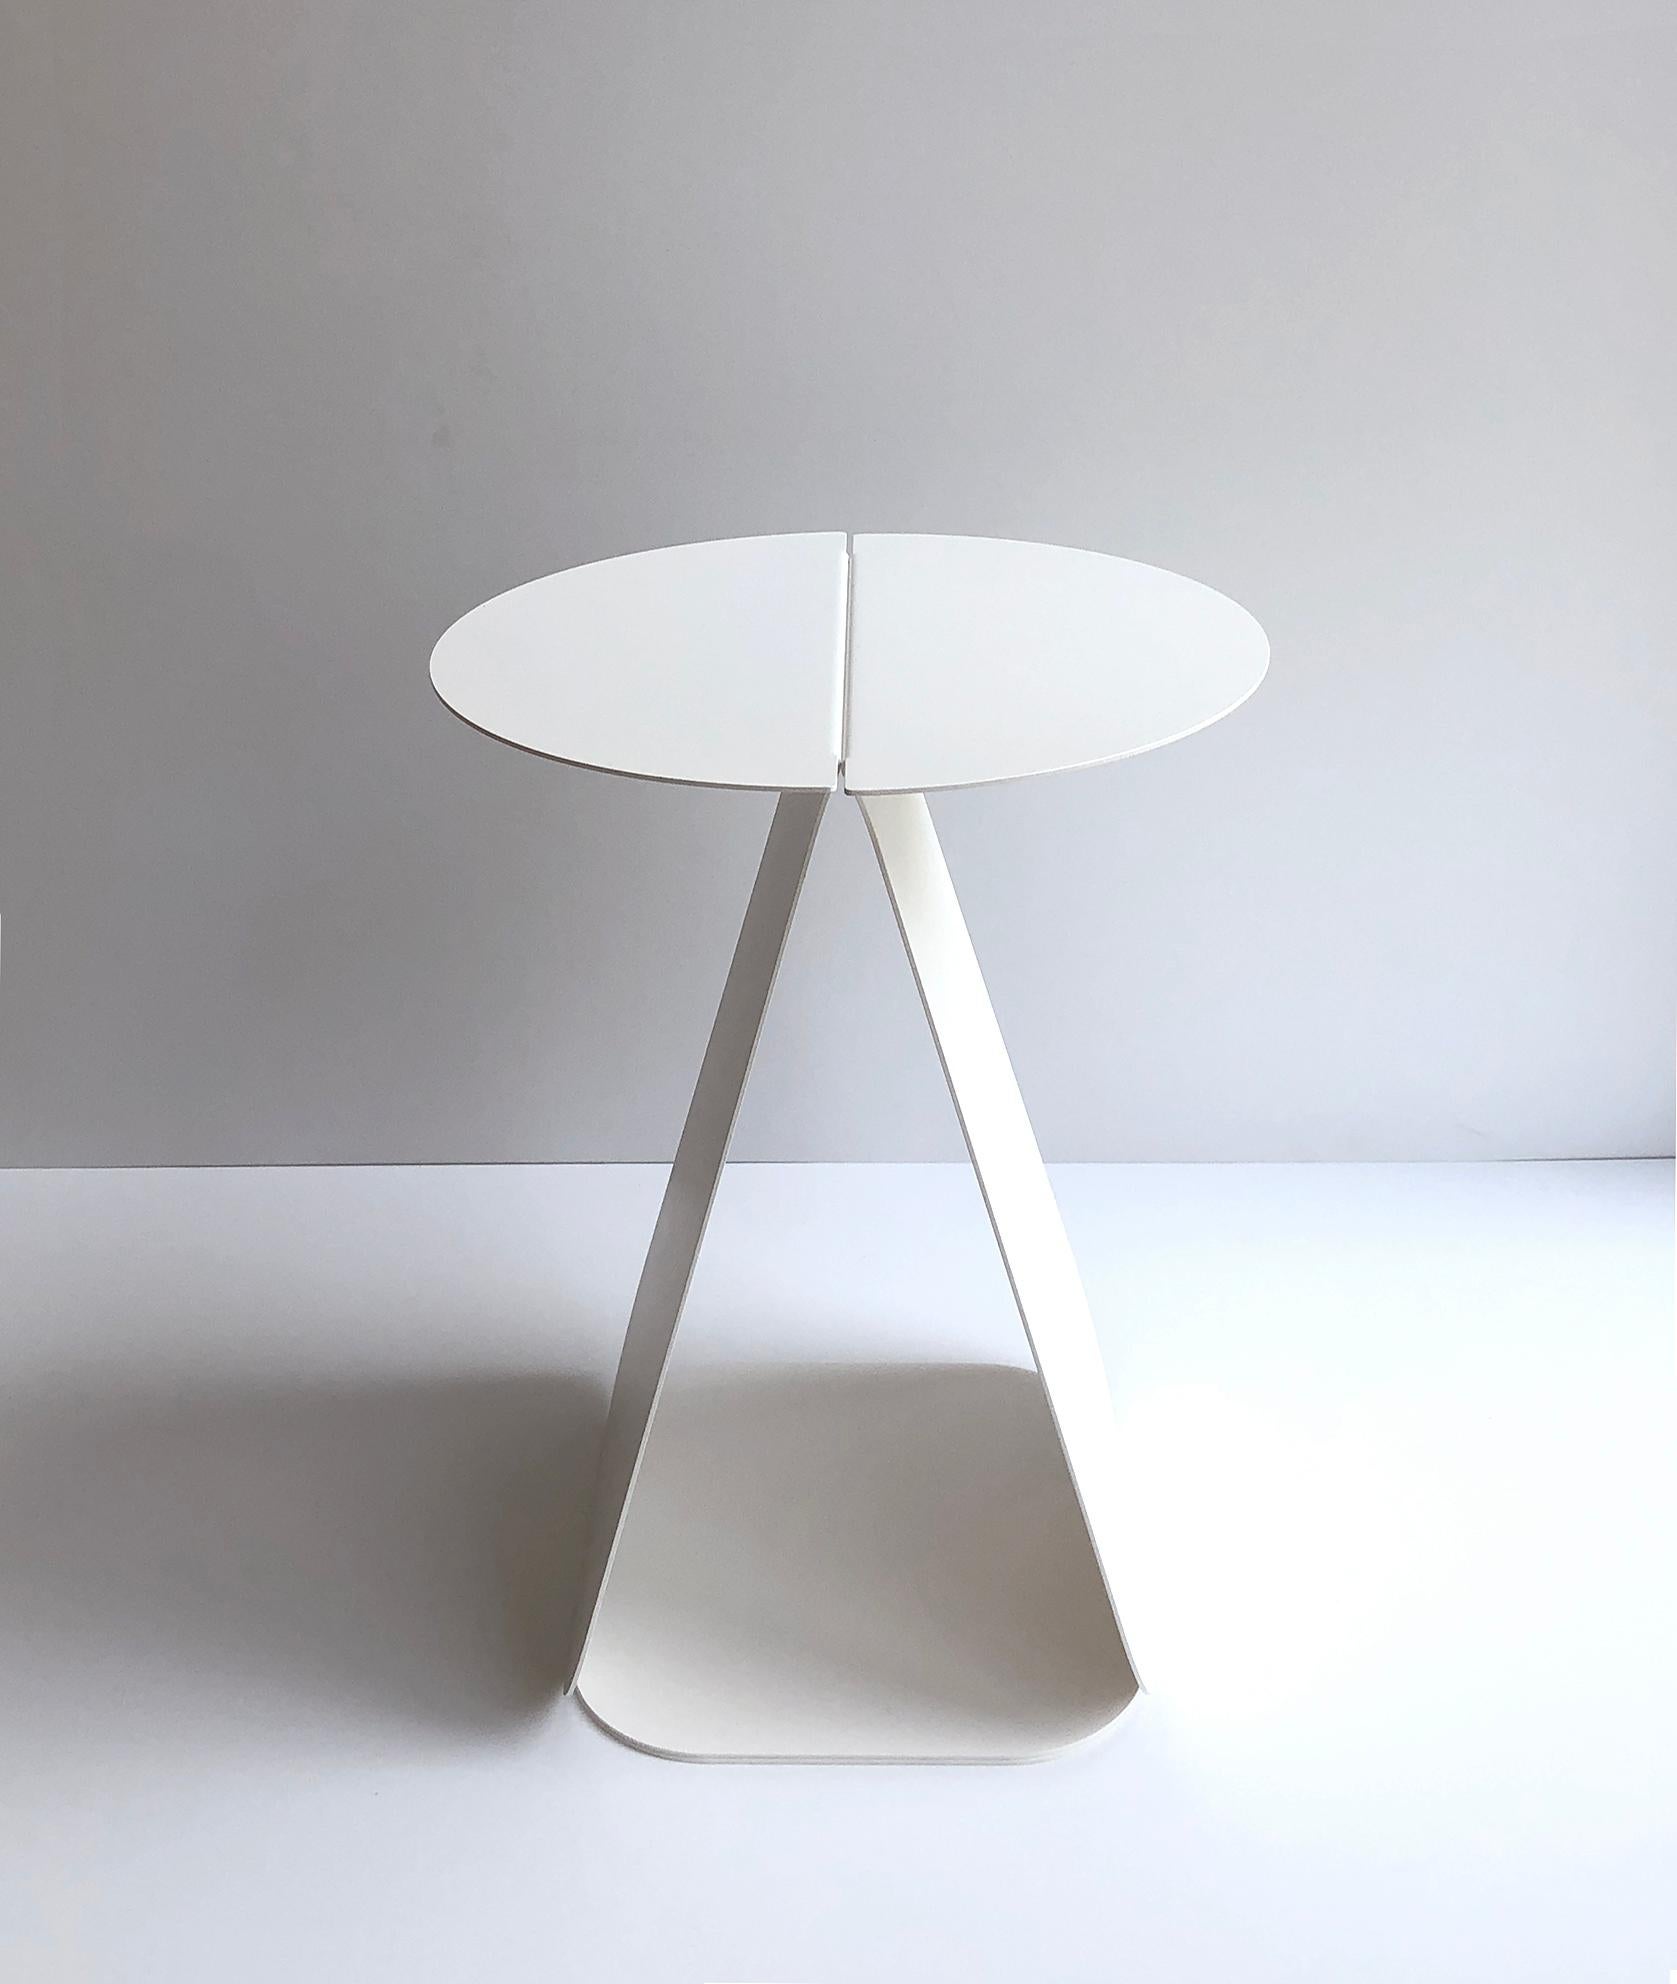 YOUMY Round Matte White Table by Mademoiselle Jo
Dimensions: Ø 36 x H 43 cm.
Materials: Matte white steel.

Also available in different colors and finishes. Round symmetrical or rectangular asymmetrical version. Available in two versions and several